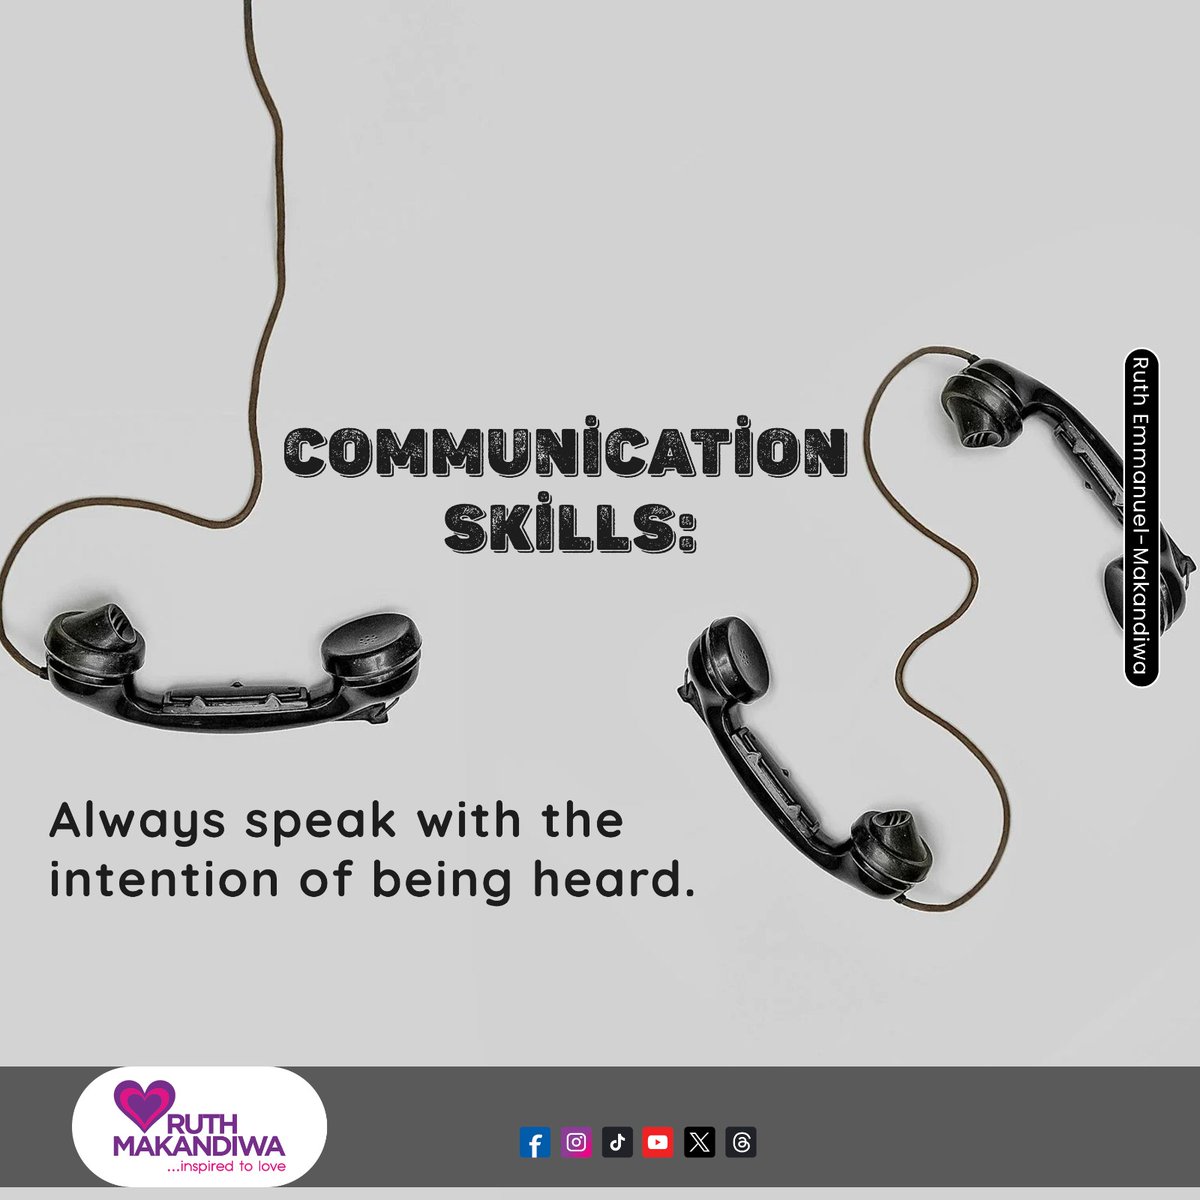 When you speak, the intention is for you to be heard and understood because you have something important to share. Once you get an opportunity to speak, it’s your opportunity and no one is going to take that away from you. Ensure that you are very careful and intentional with